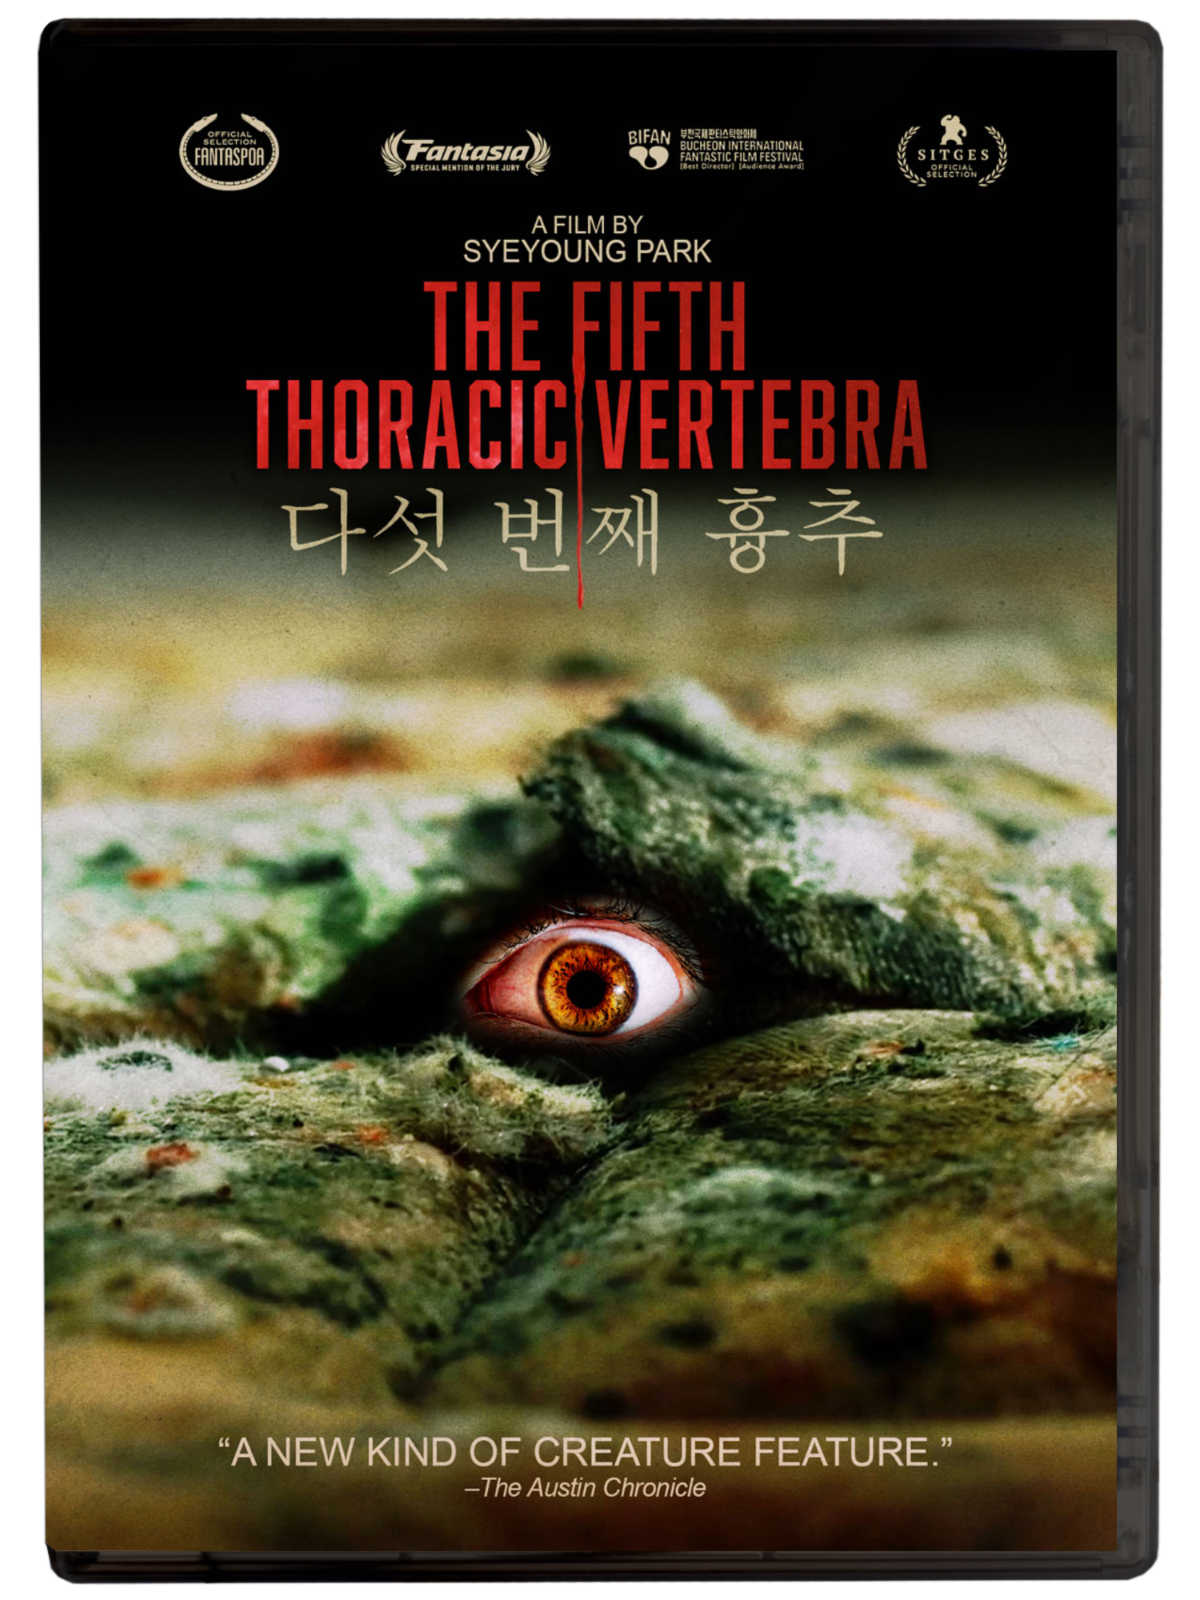 Embark on a mind-bending journey into the enigmatic world of The Fifth Thoracic Vertebra film, a Korean cult classic that defies explanation.